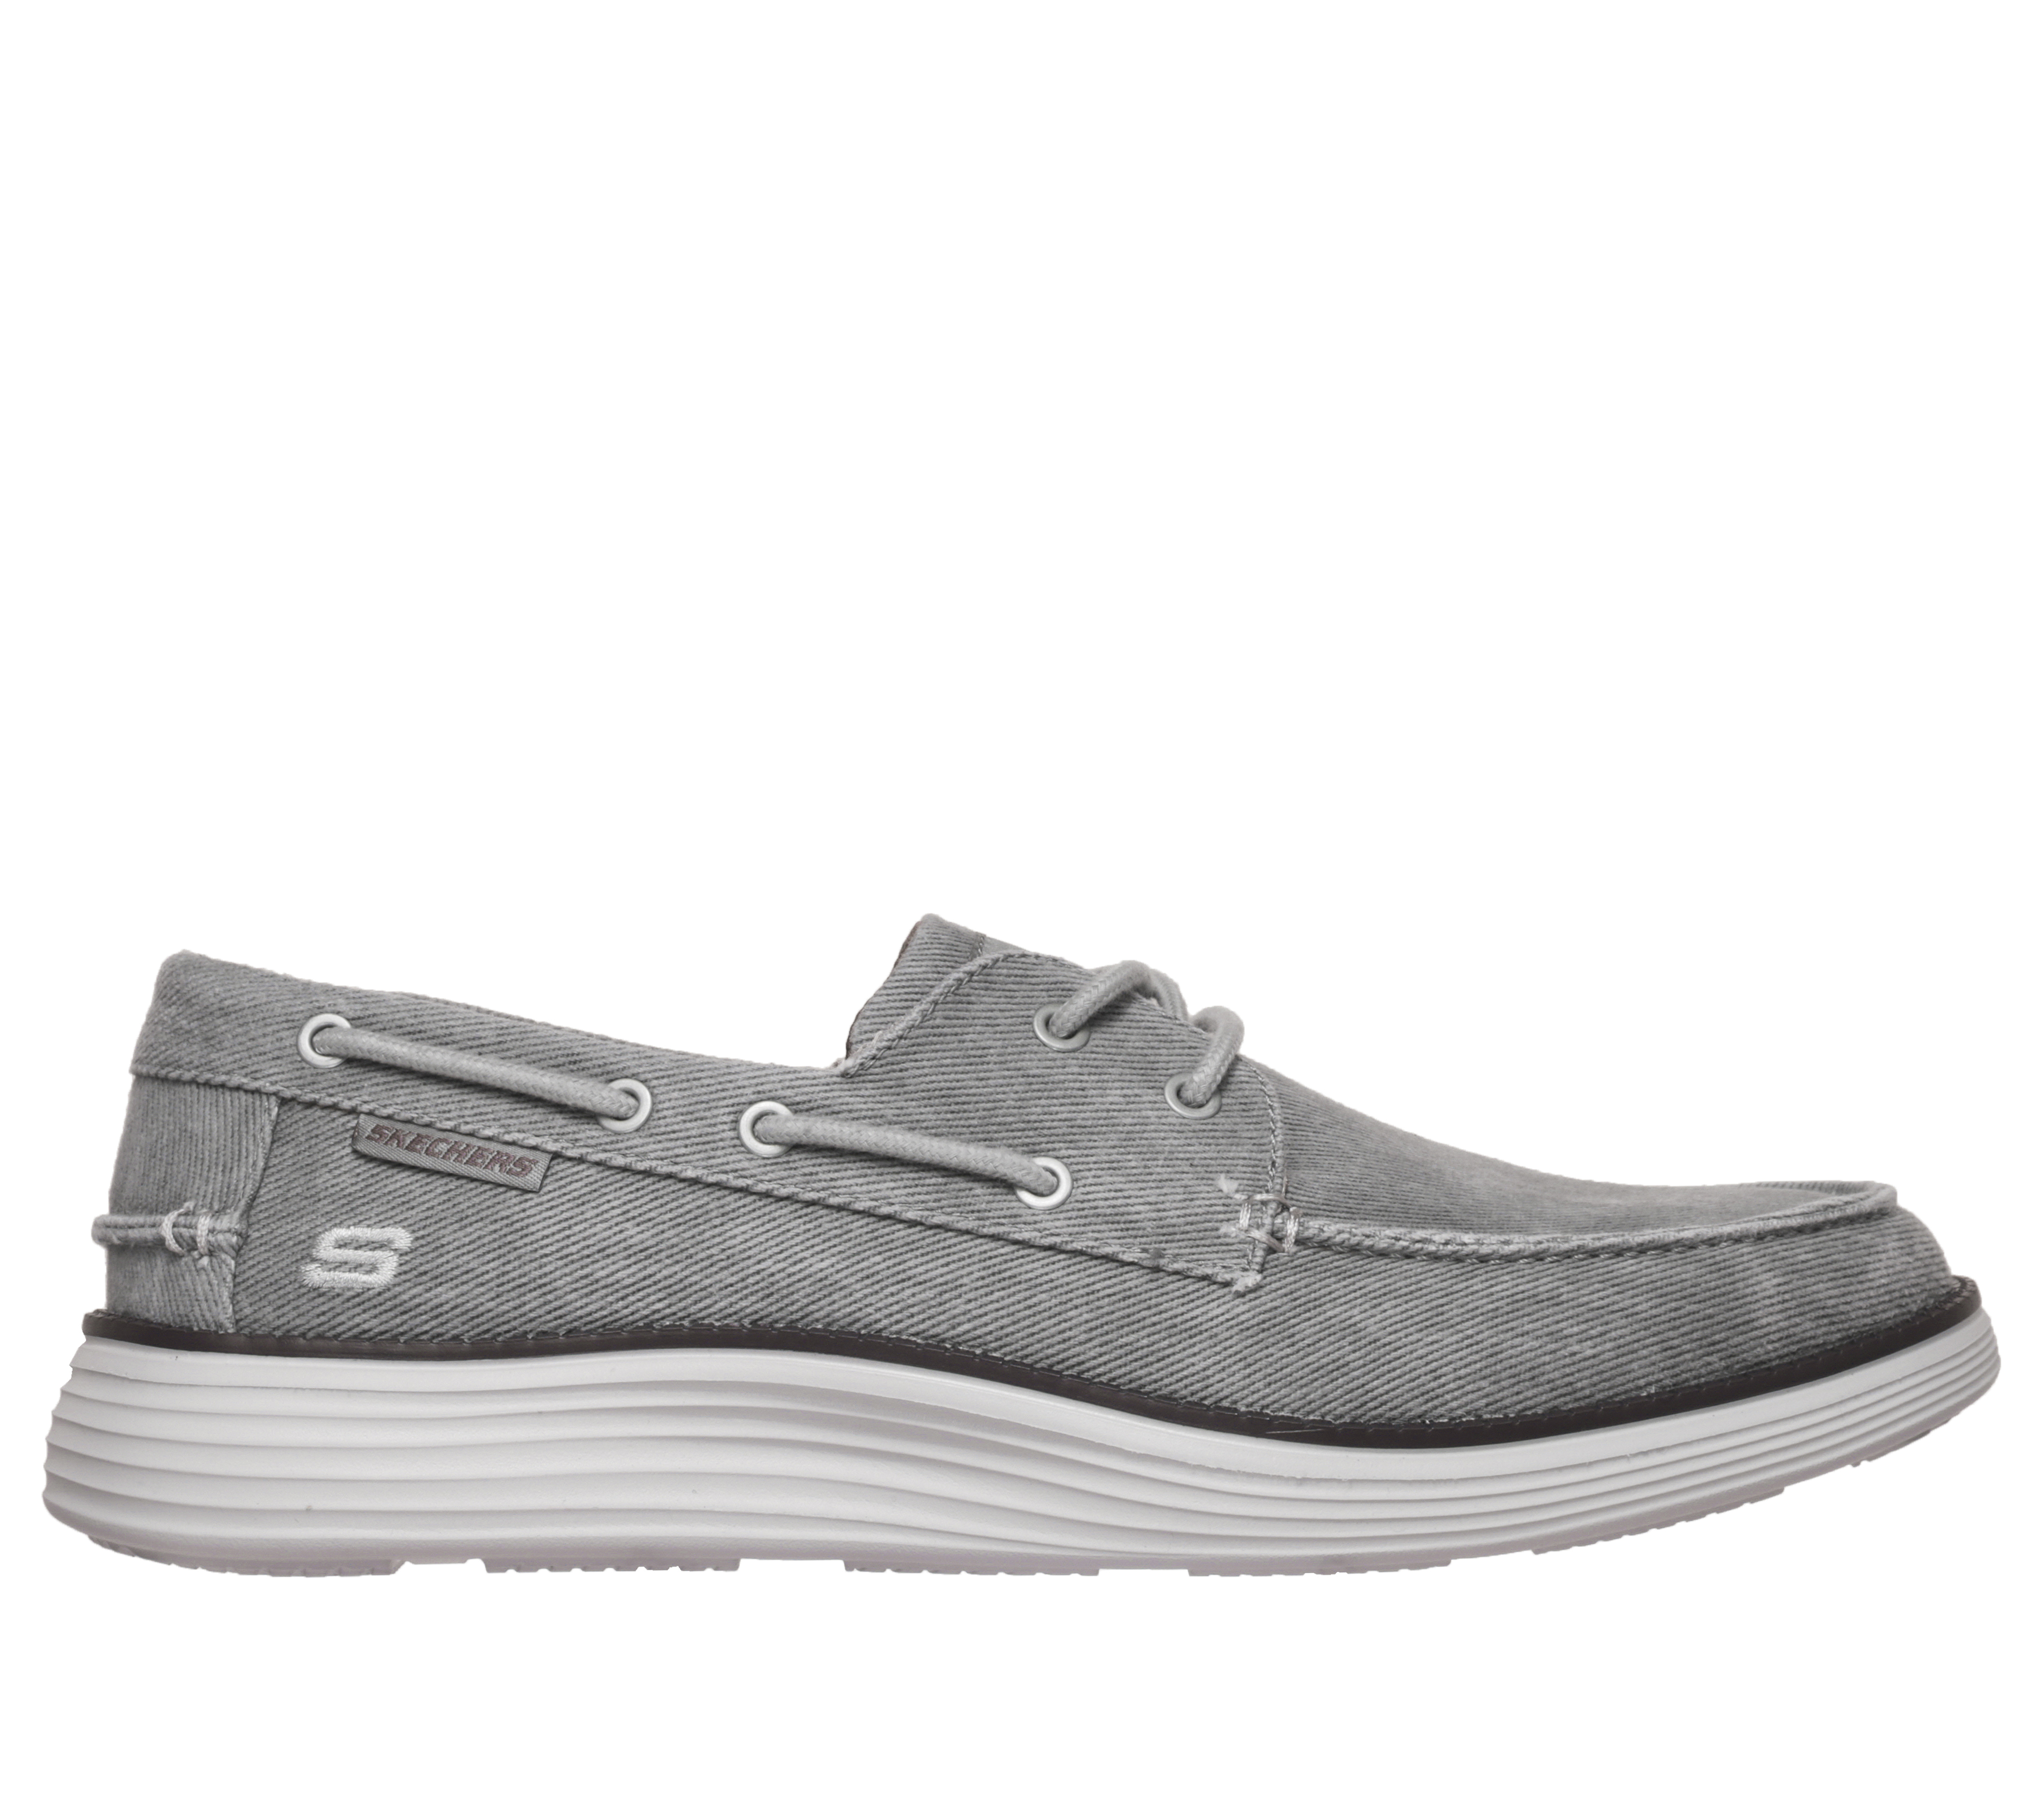 skechers x-cellorator 2.0 boys' running shoes